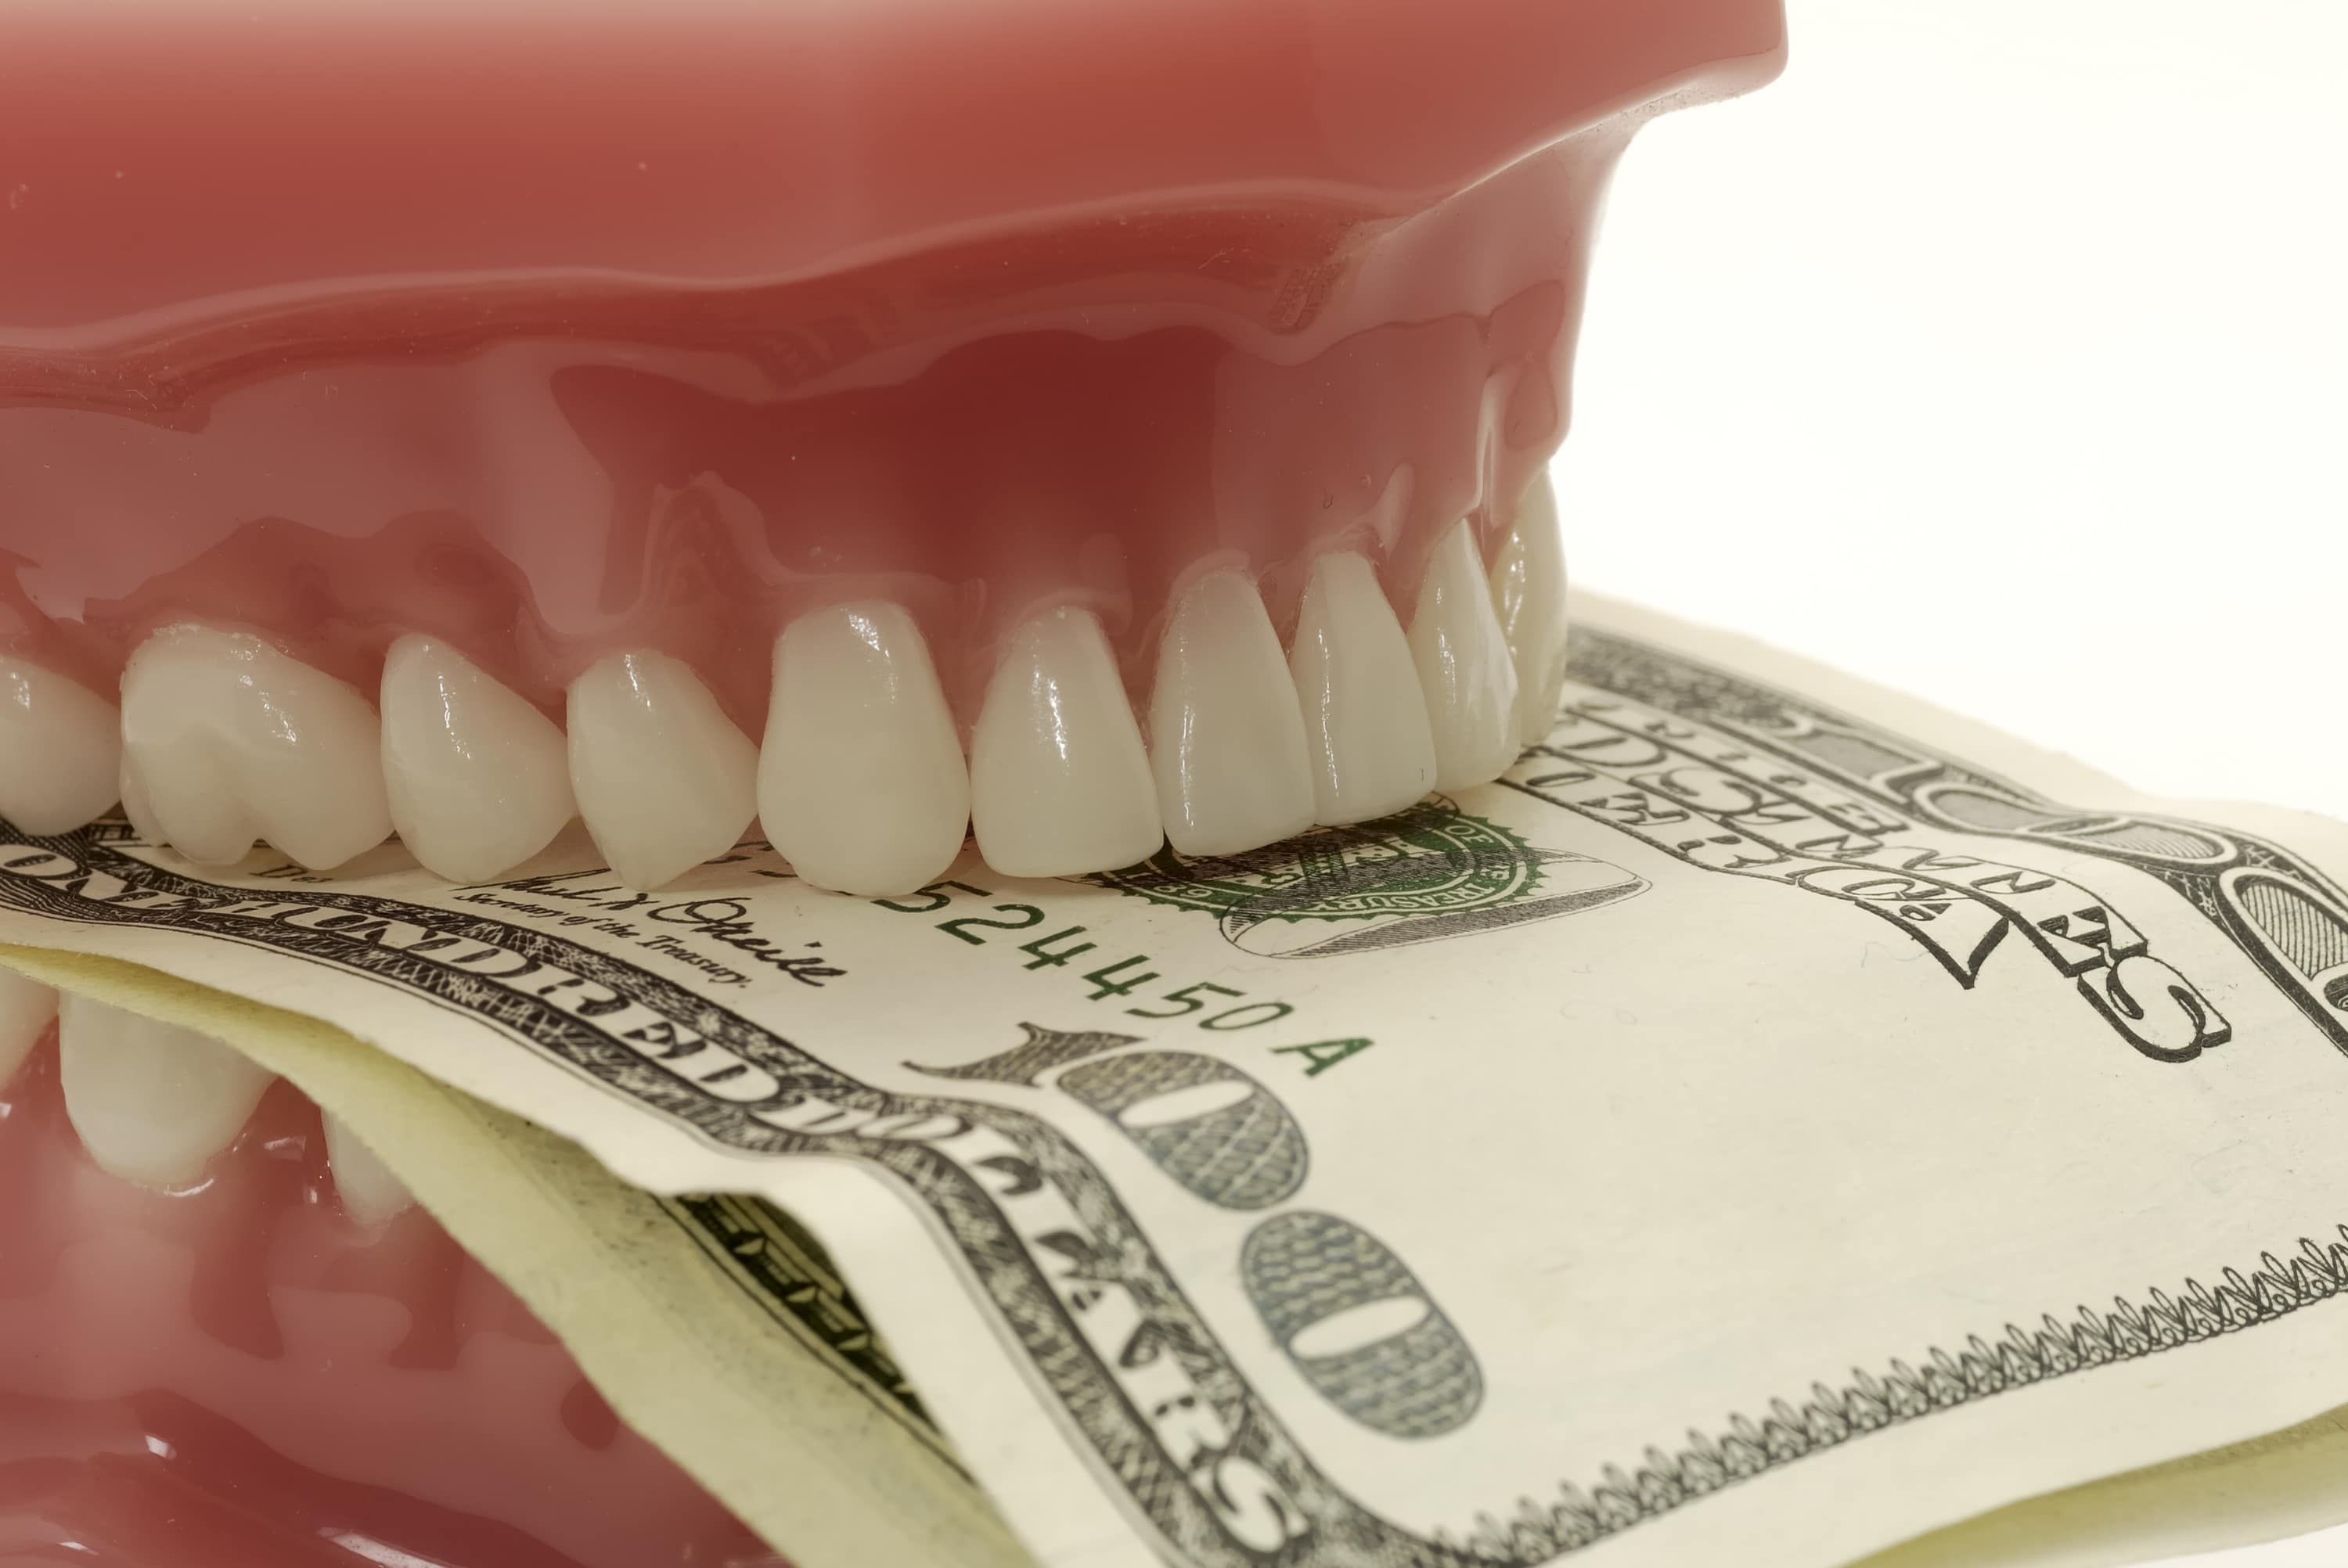 Is Dental Insurance Worth It? - Affordable Plans, Types ...